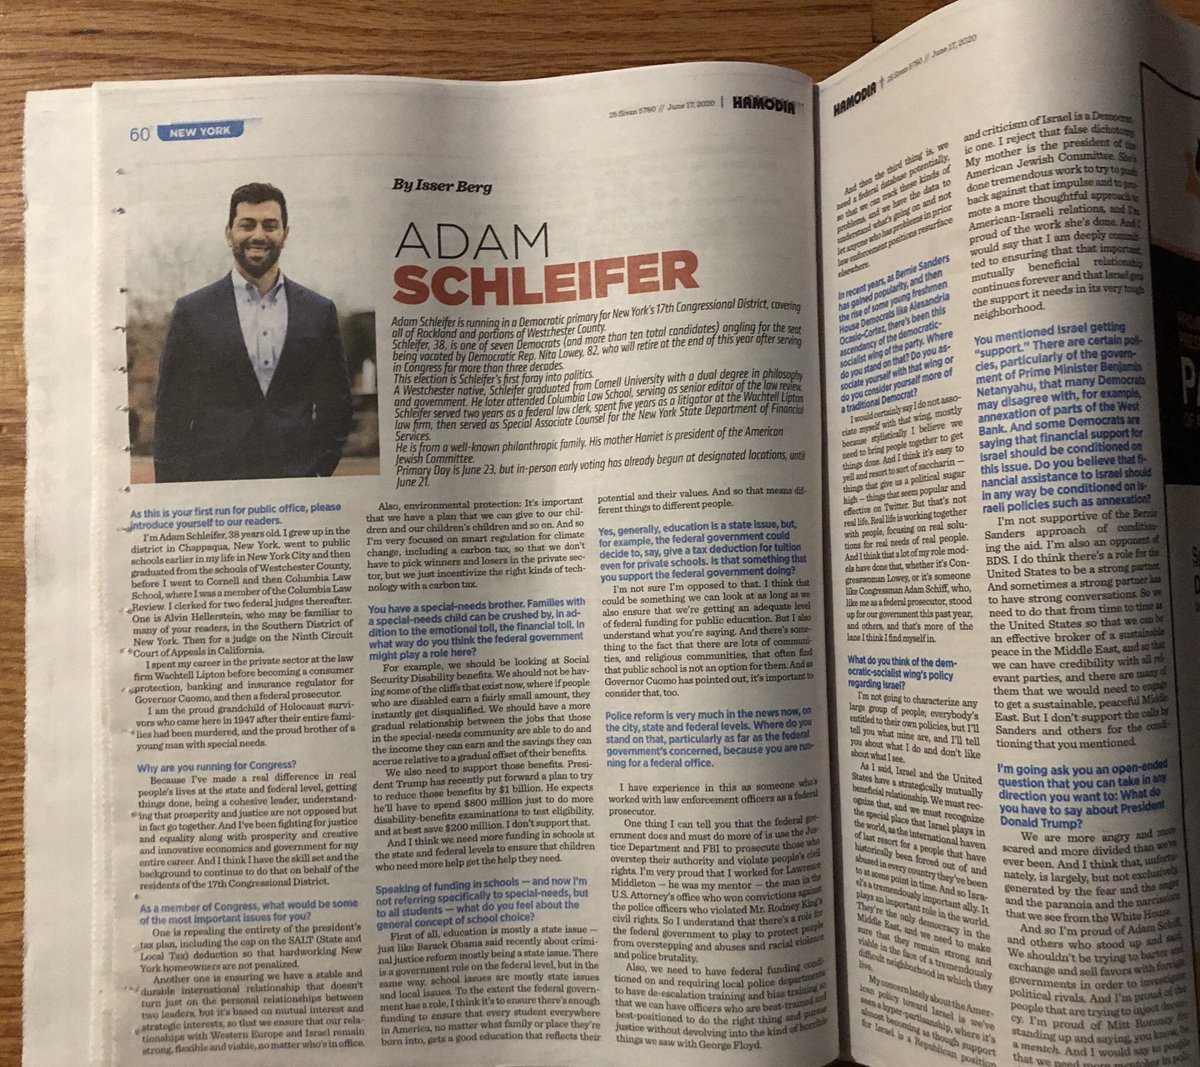 Hamodia, one of the most-read weeklies in the Orthodox Jewish Community, interviewed a few  #NY17 candidates for this week’s issue:1)  @DavidCarlucci  https://hamodia.com/2020/06/18/interview-congressional-candidate-david-carlucci/2)  @DavidBuchwald  https://hamodia.com/2020/06/18/interview-congressional-candidate-david-buchwald/3)  @AdamSchleiferNY  https://hamodia.com/2020/06/18/interview-congressional-candidate-adam-schleifer/